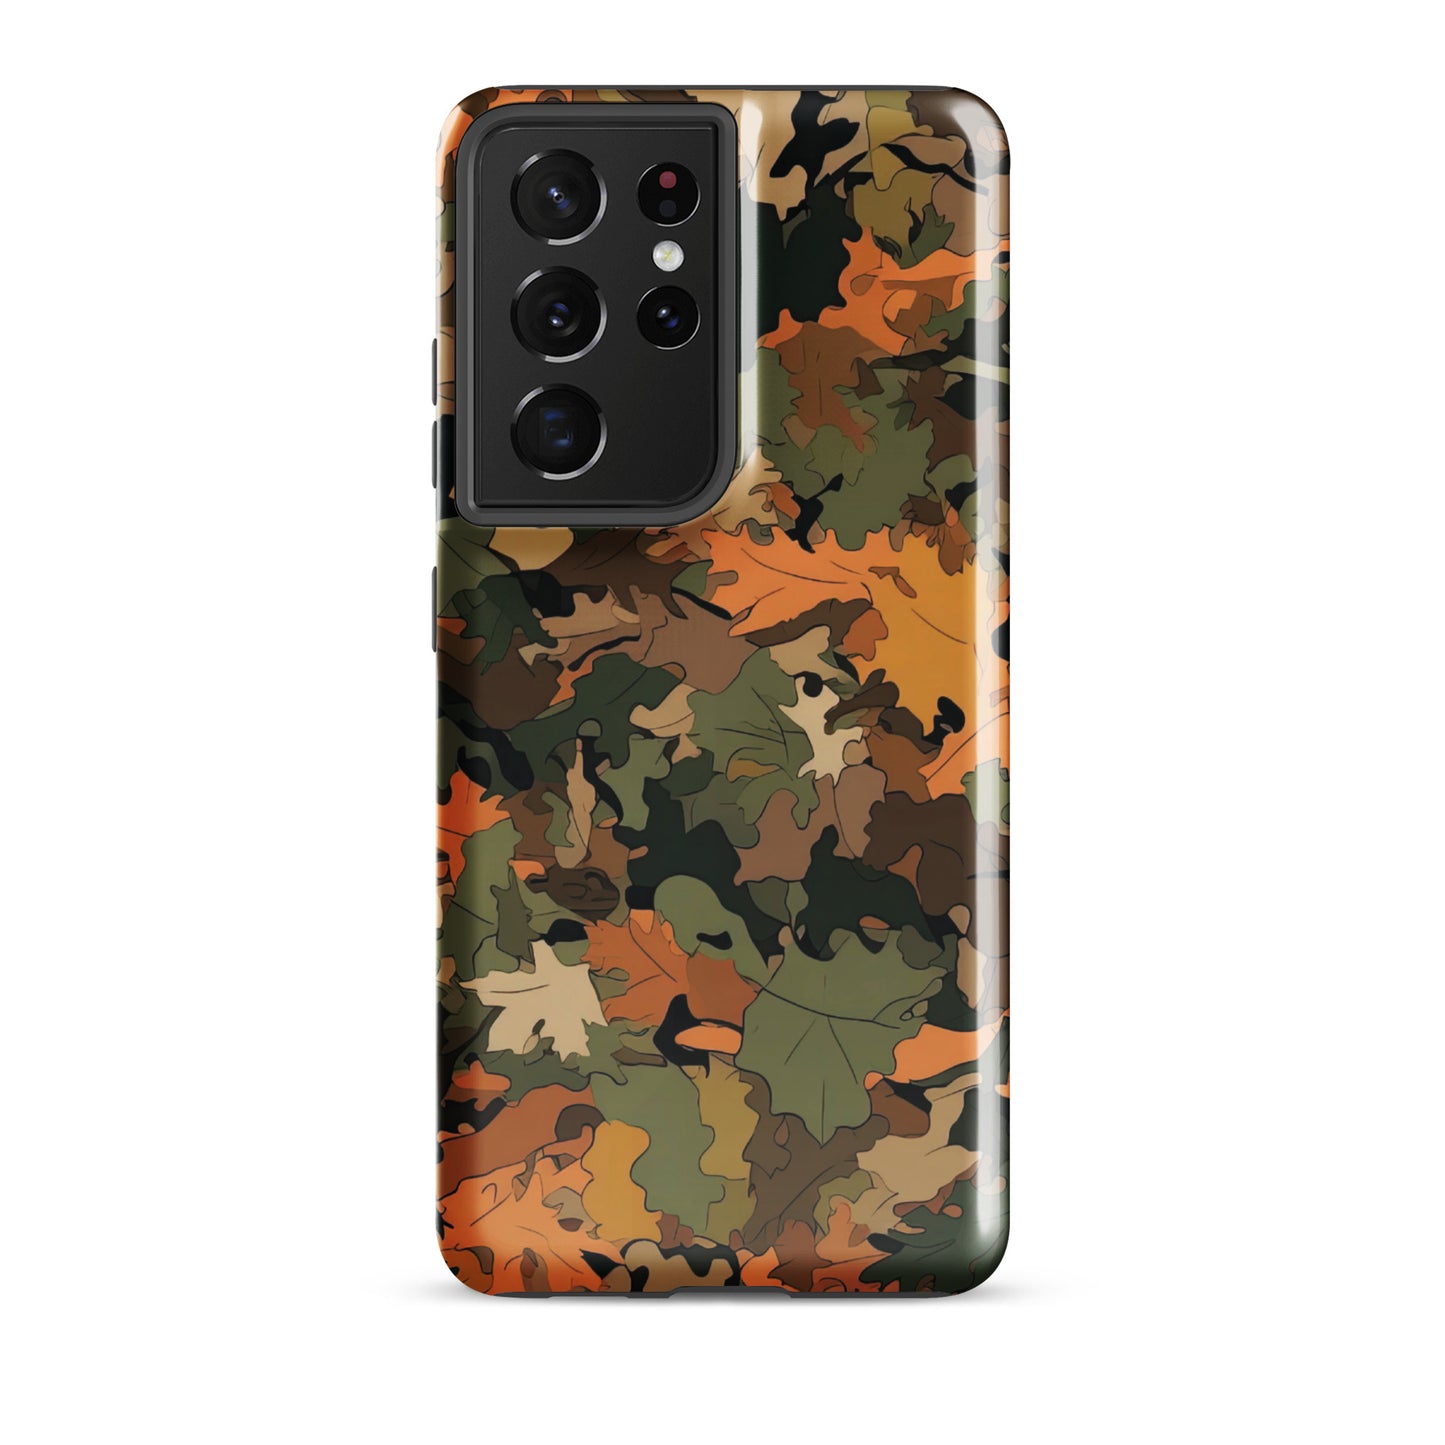 Muley Slayer - Tough case for Samsung®